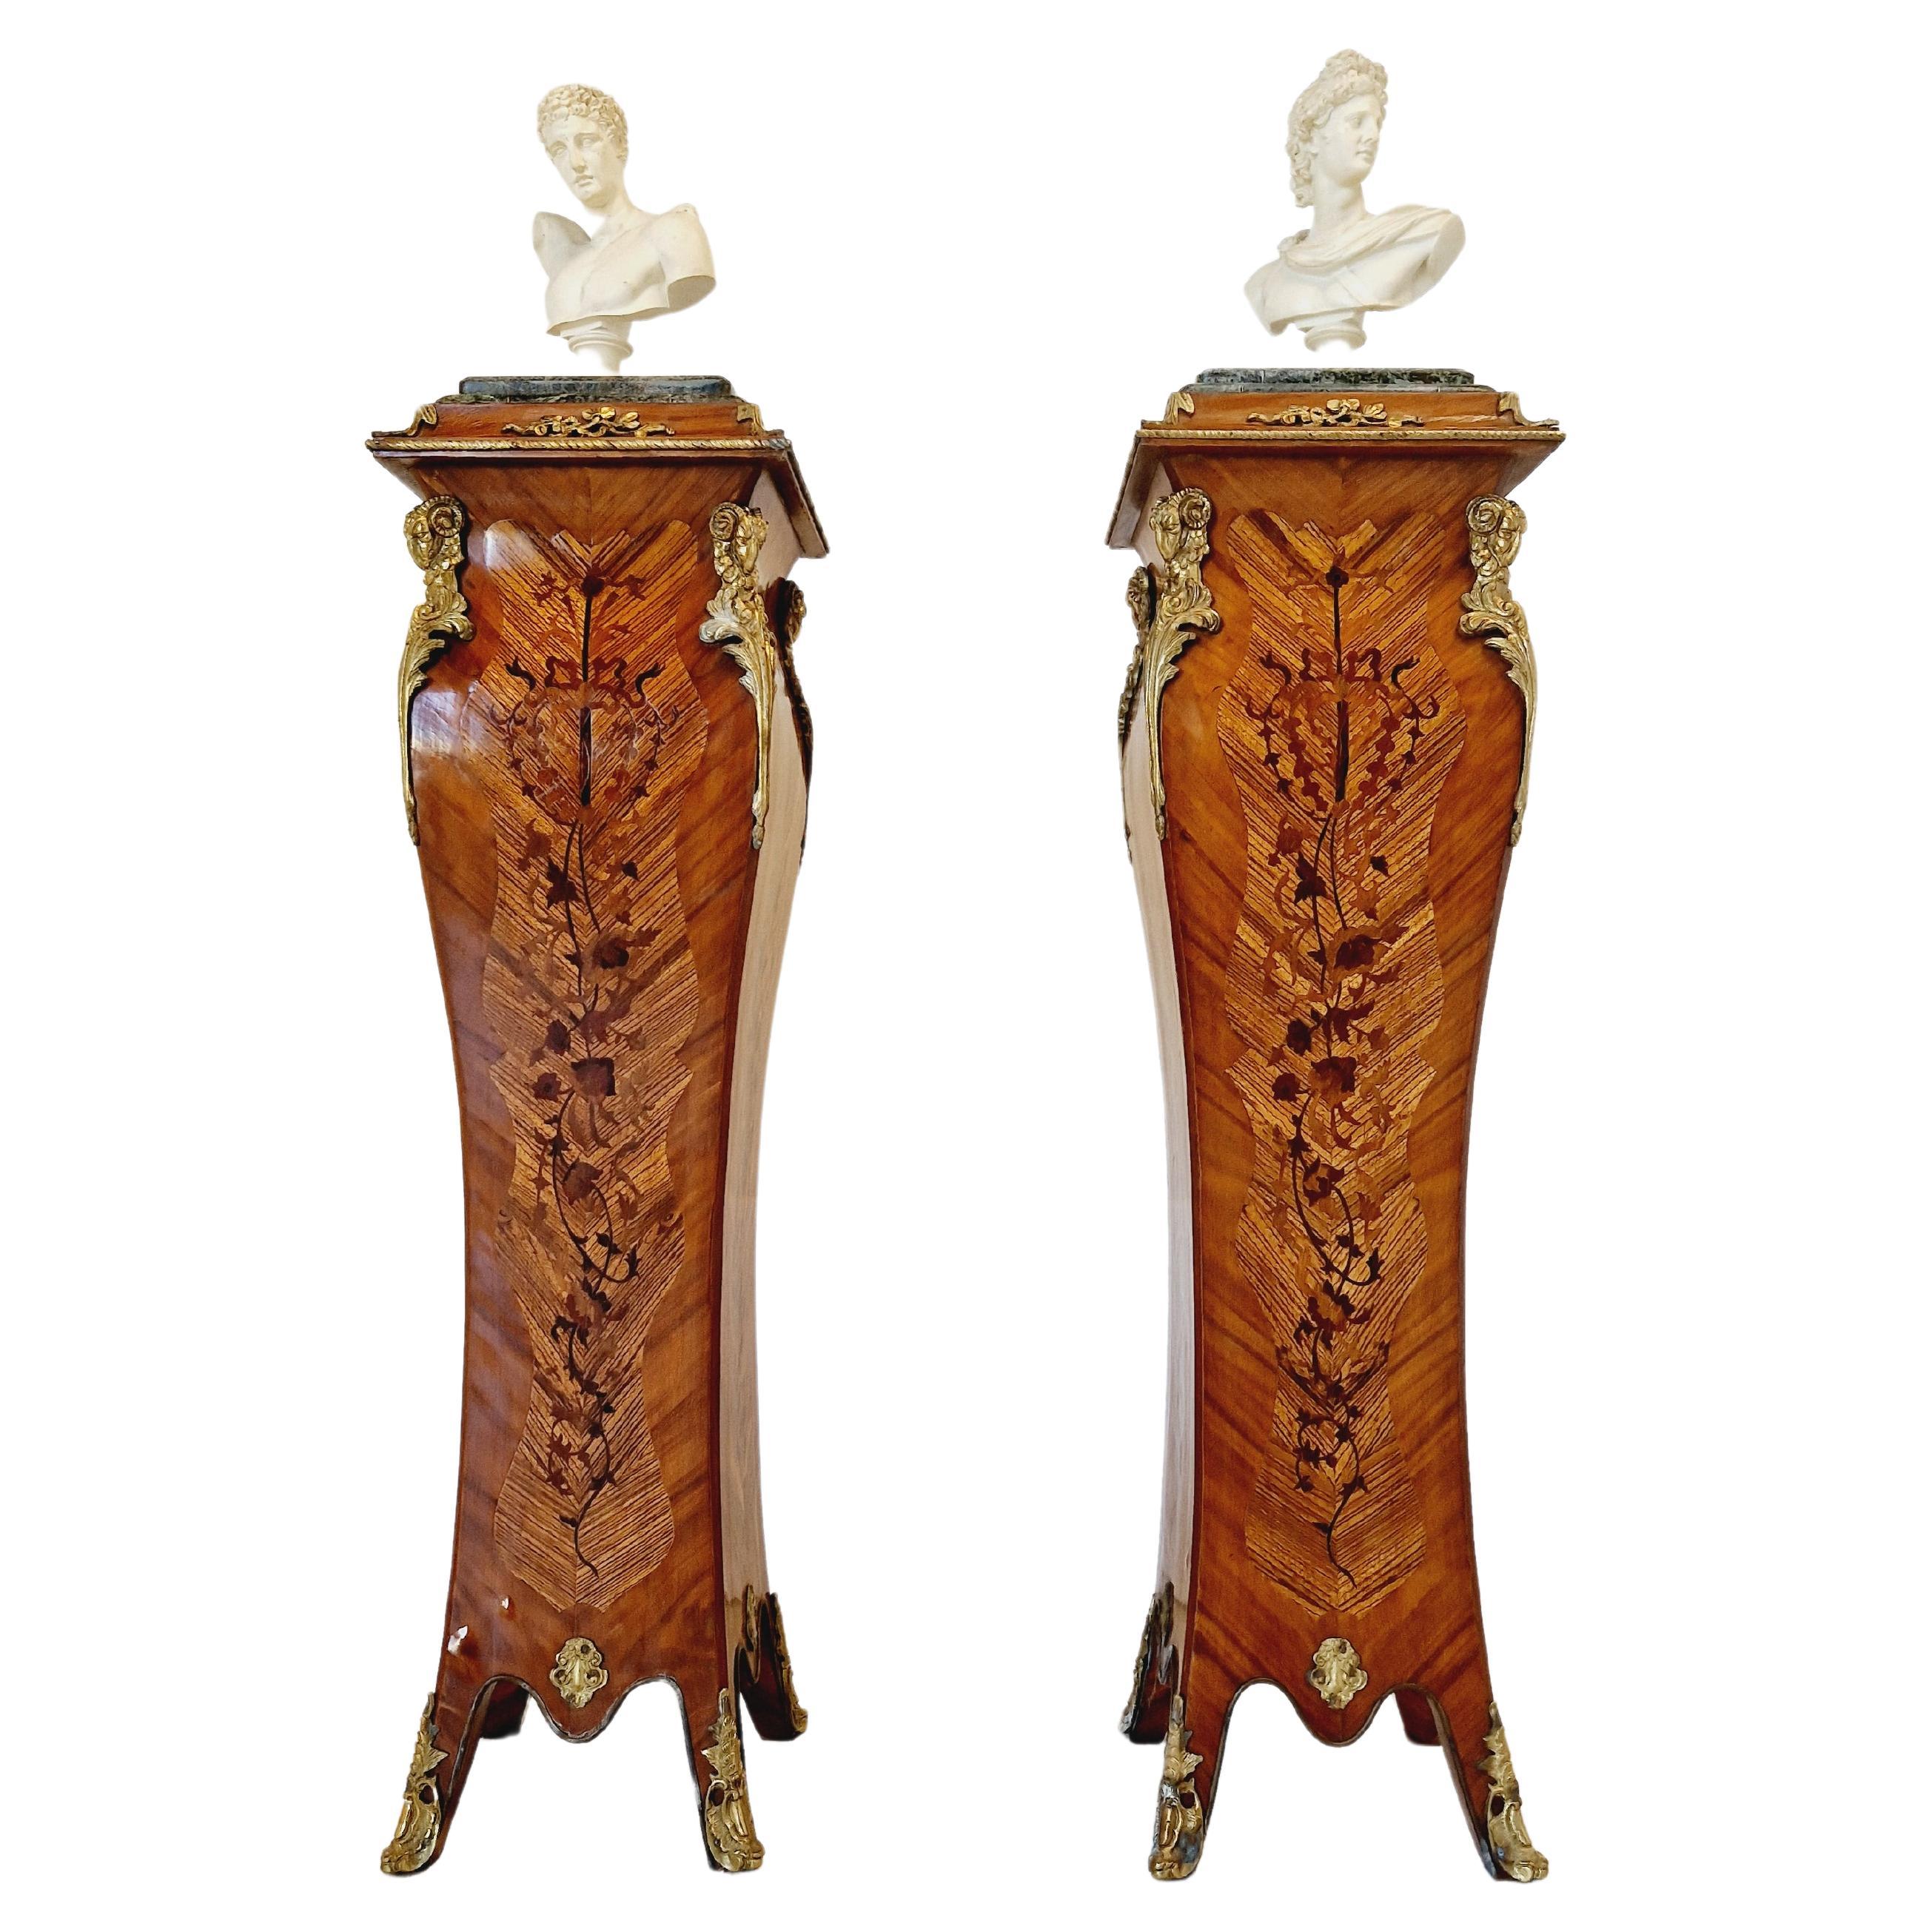 Pair of French Bombe Pedestals